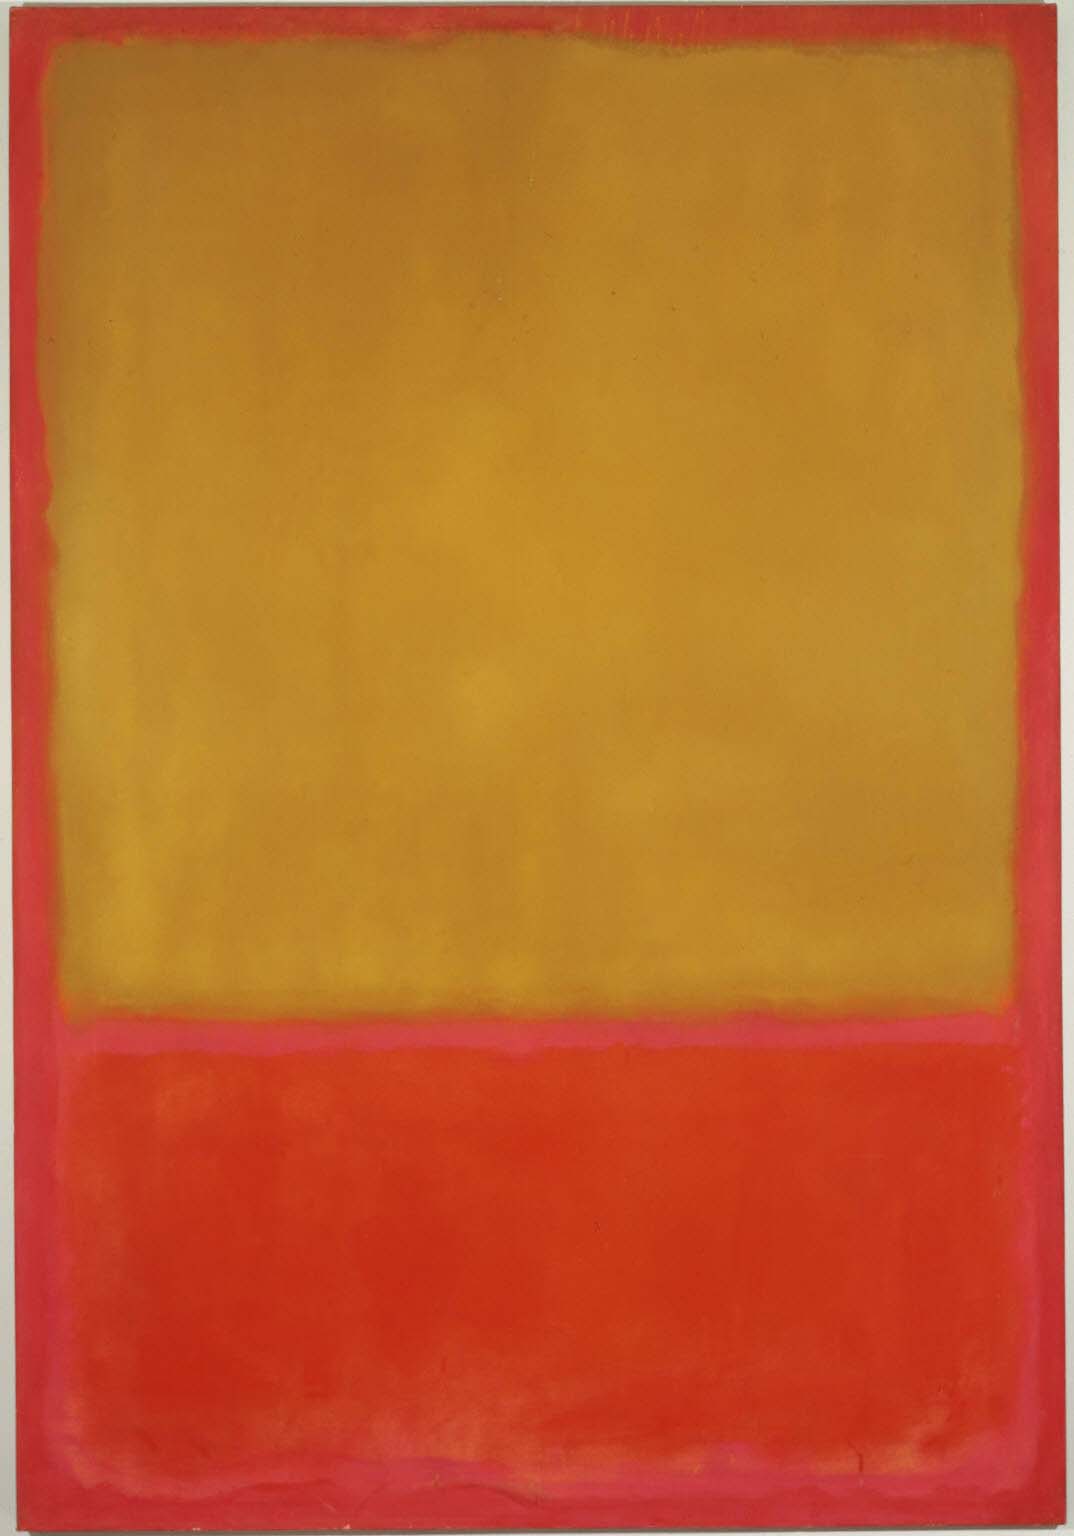 Ochre and Red | The Phillips Collection